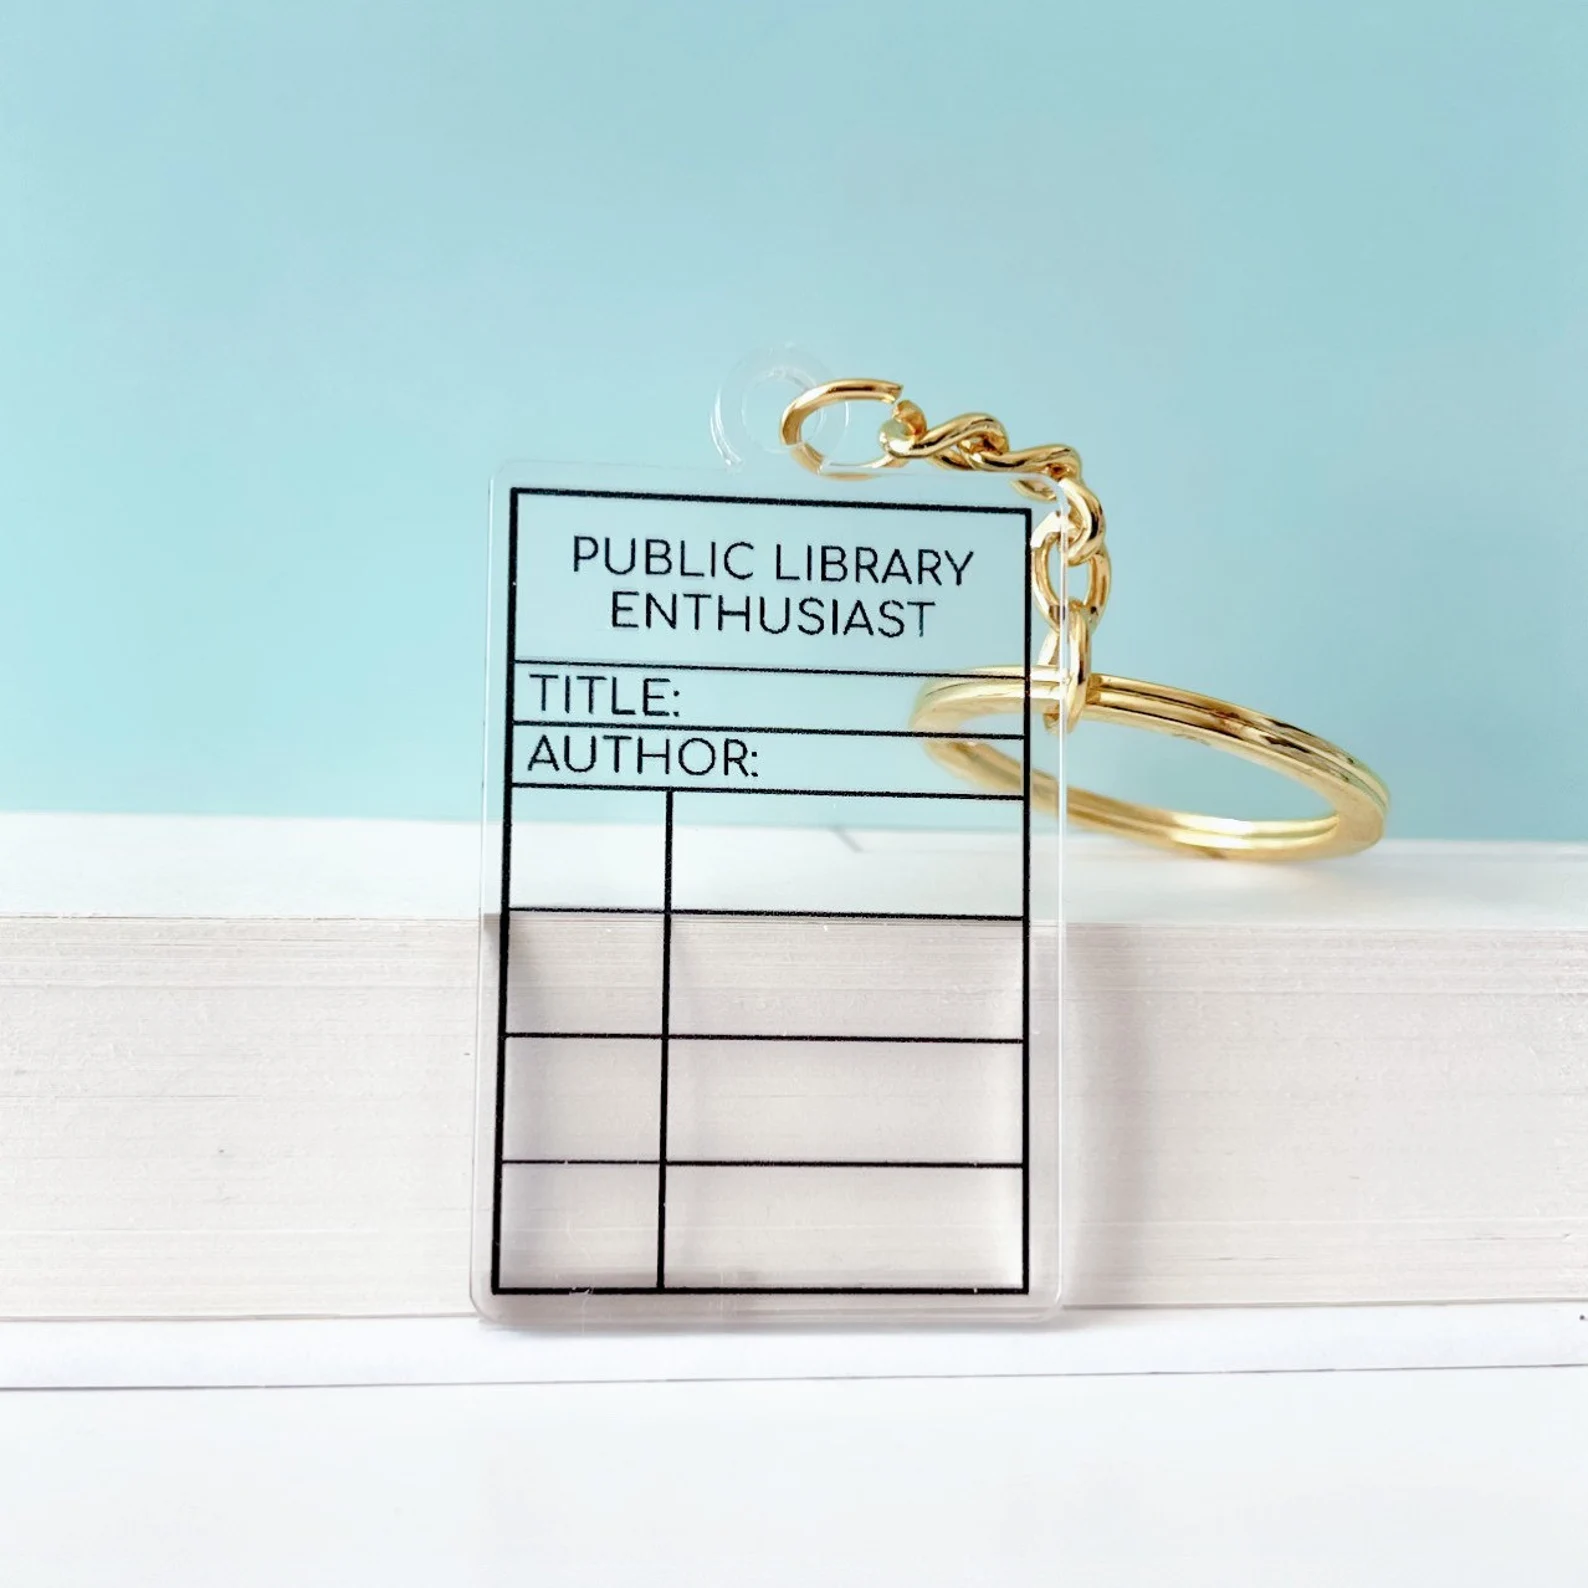 A clear plastic keychain in the shape of a library card.